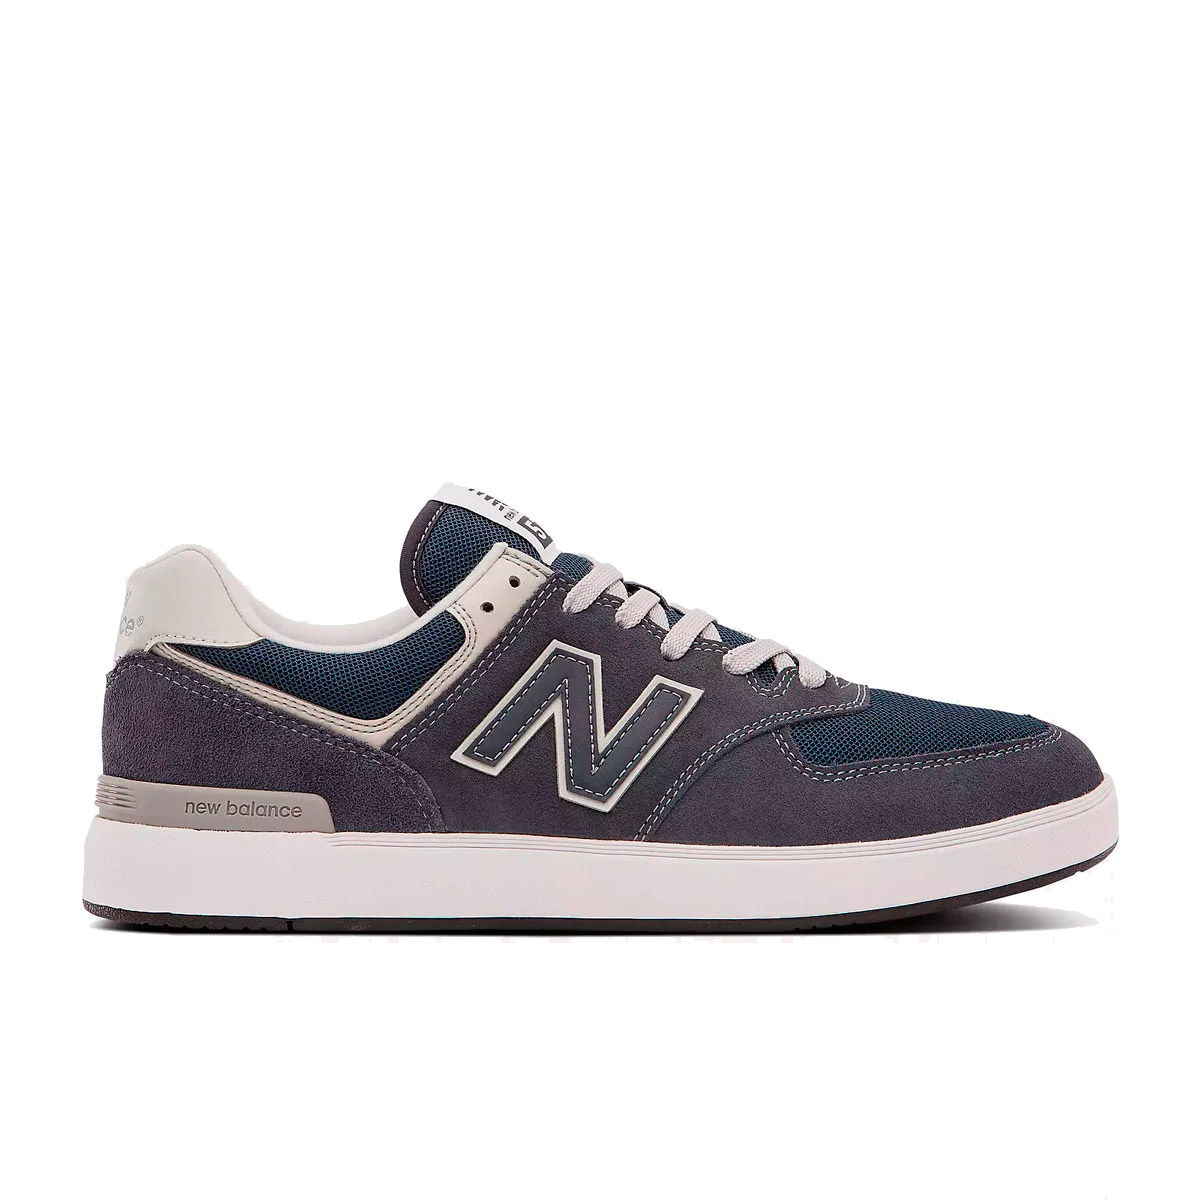 4: New Balance AM574 Sneakers